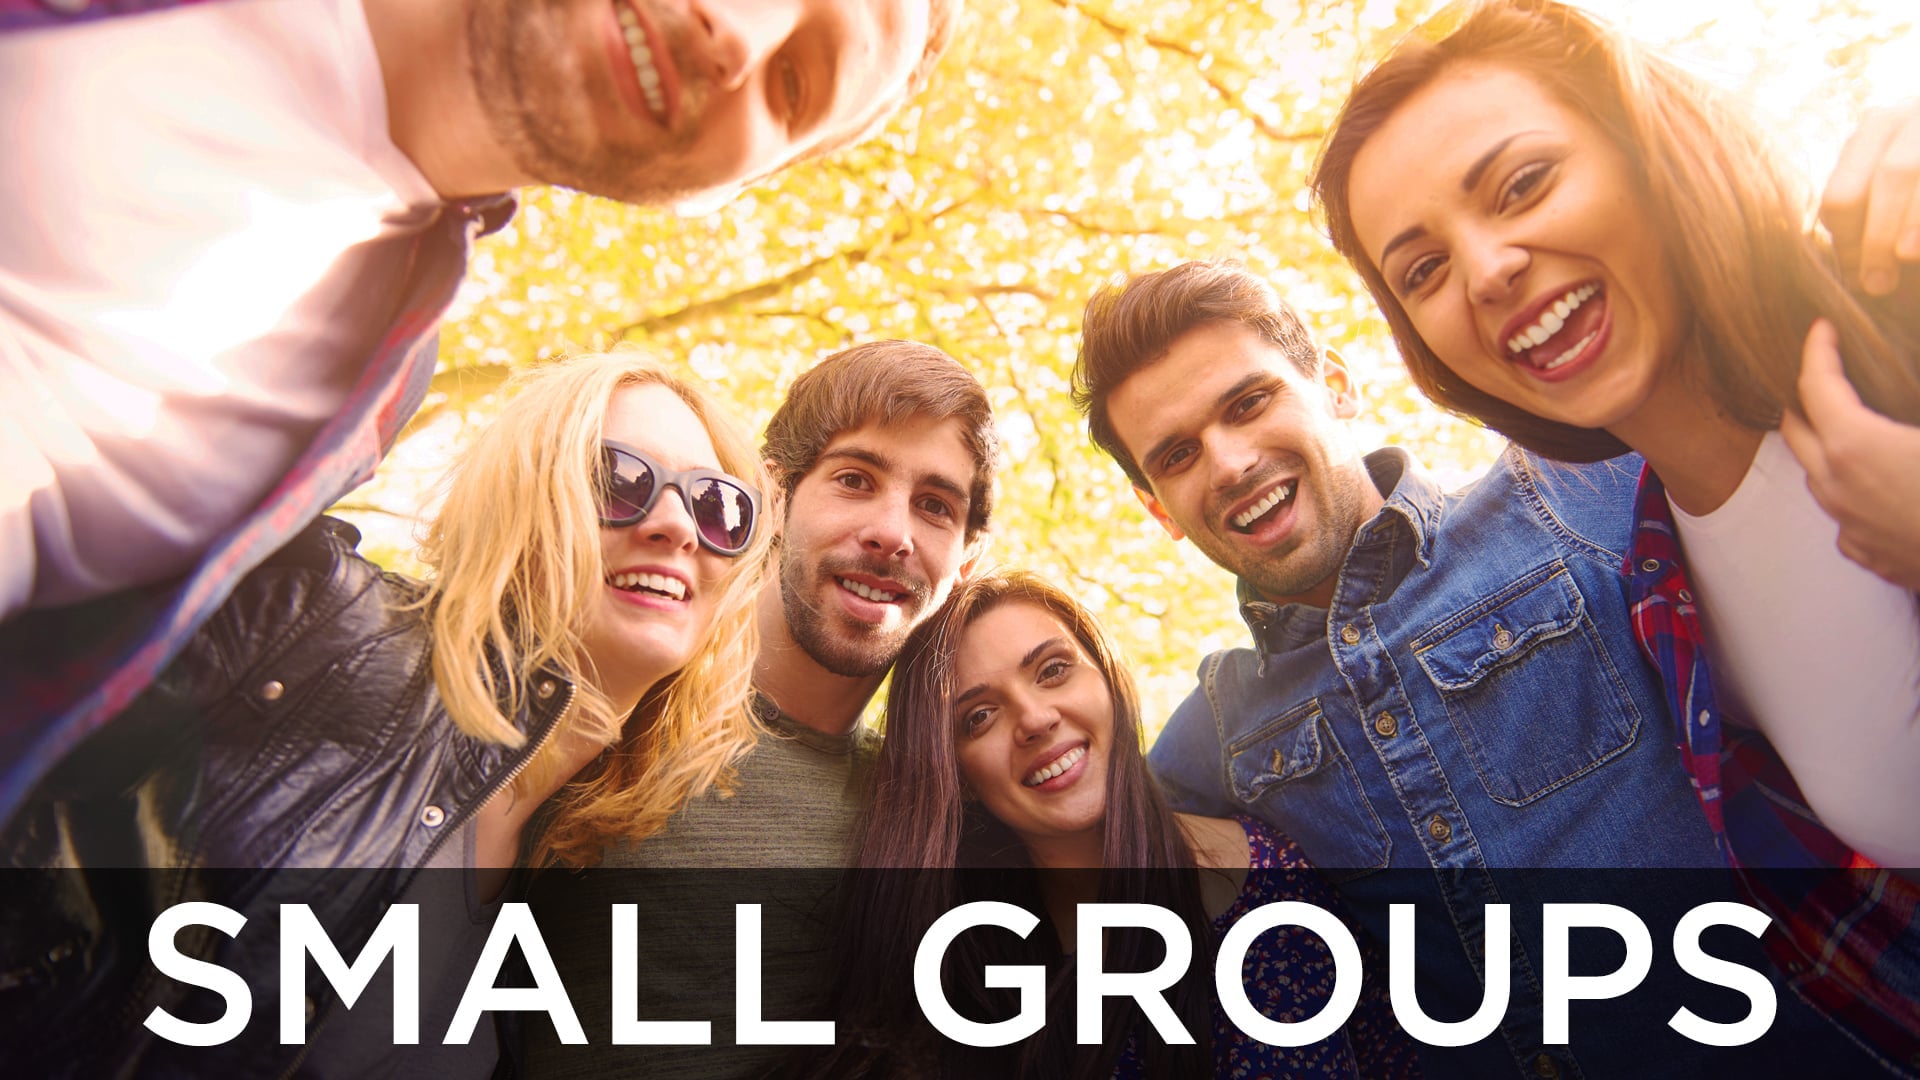 Small Groups in the Bible